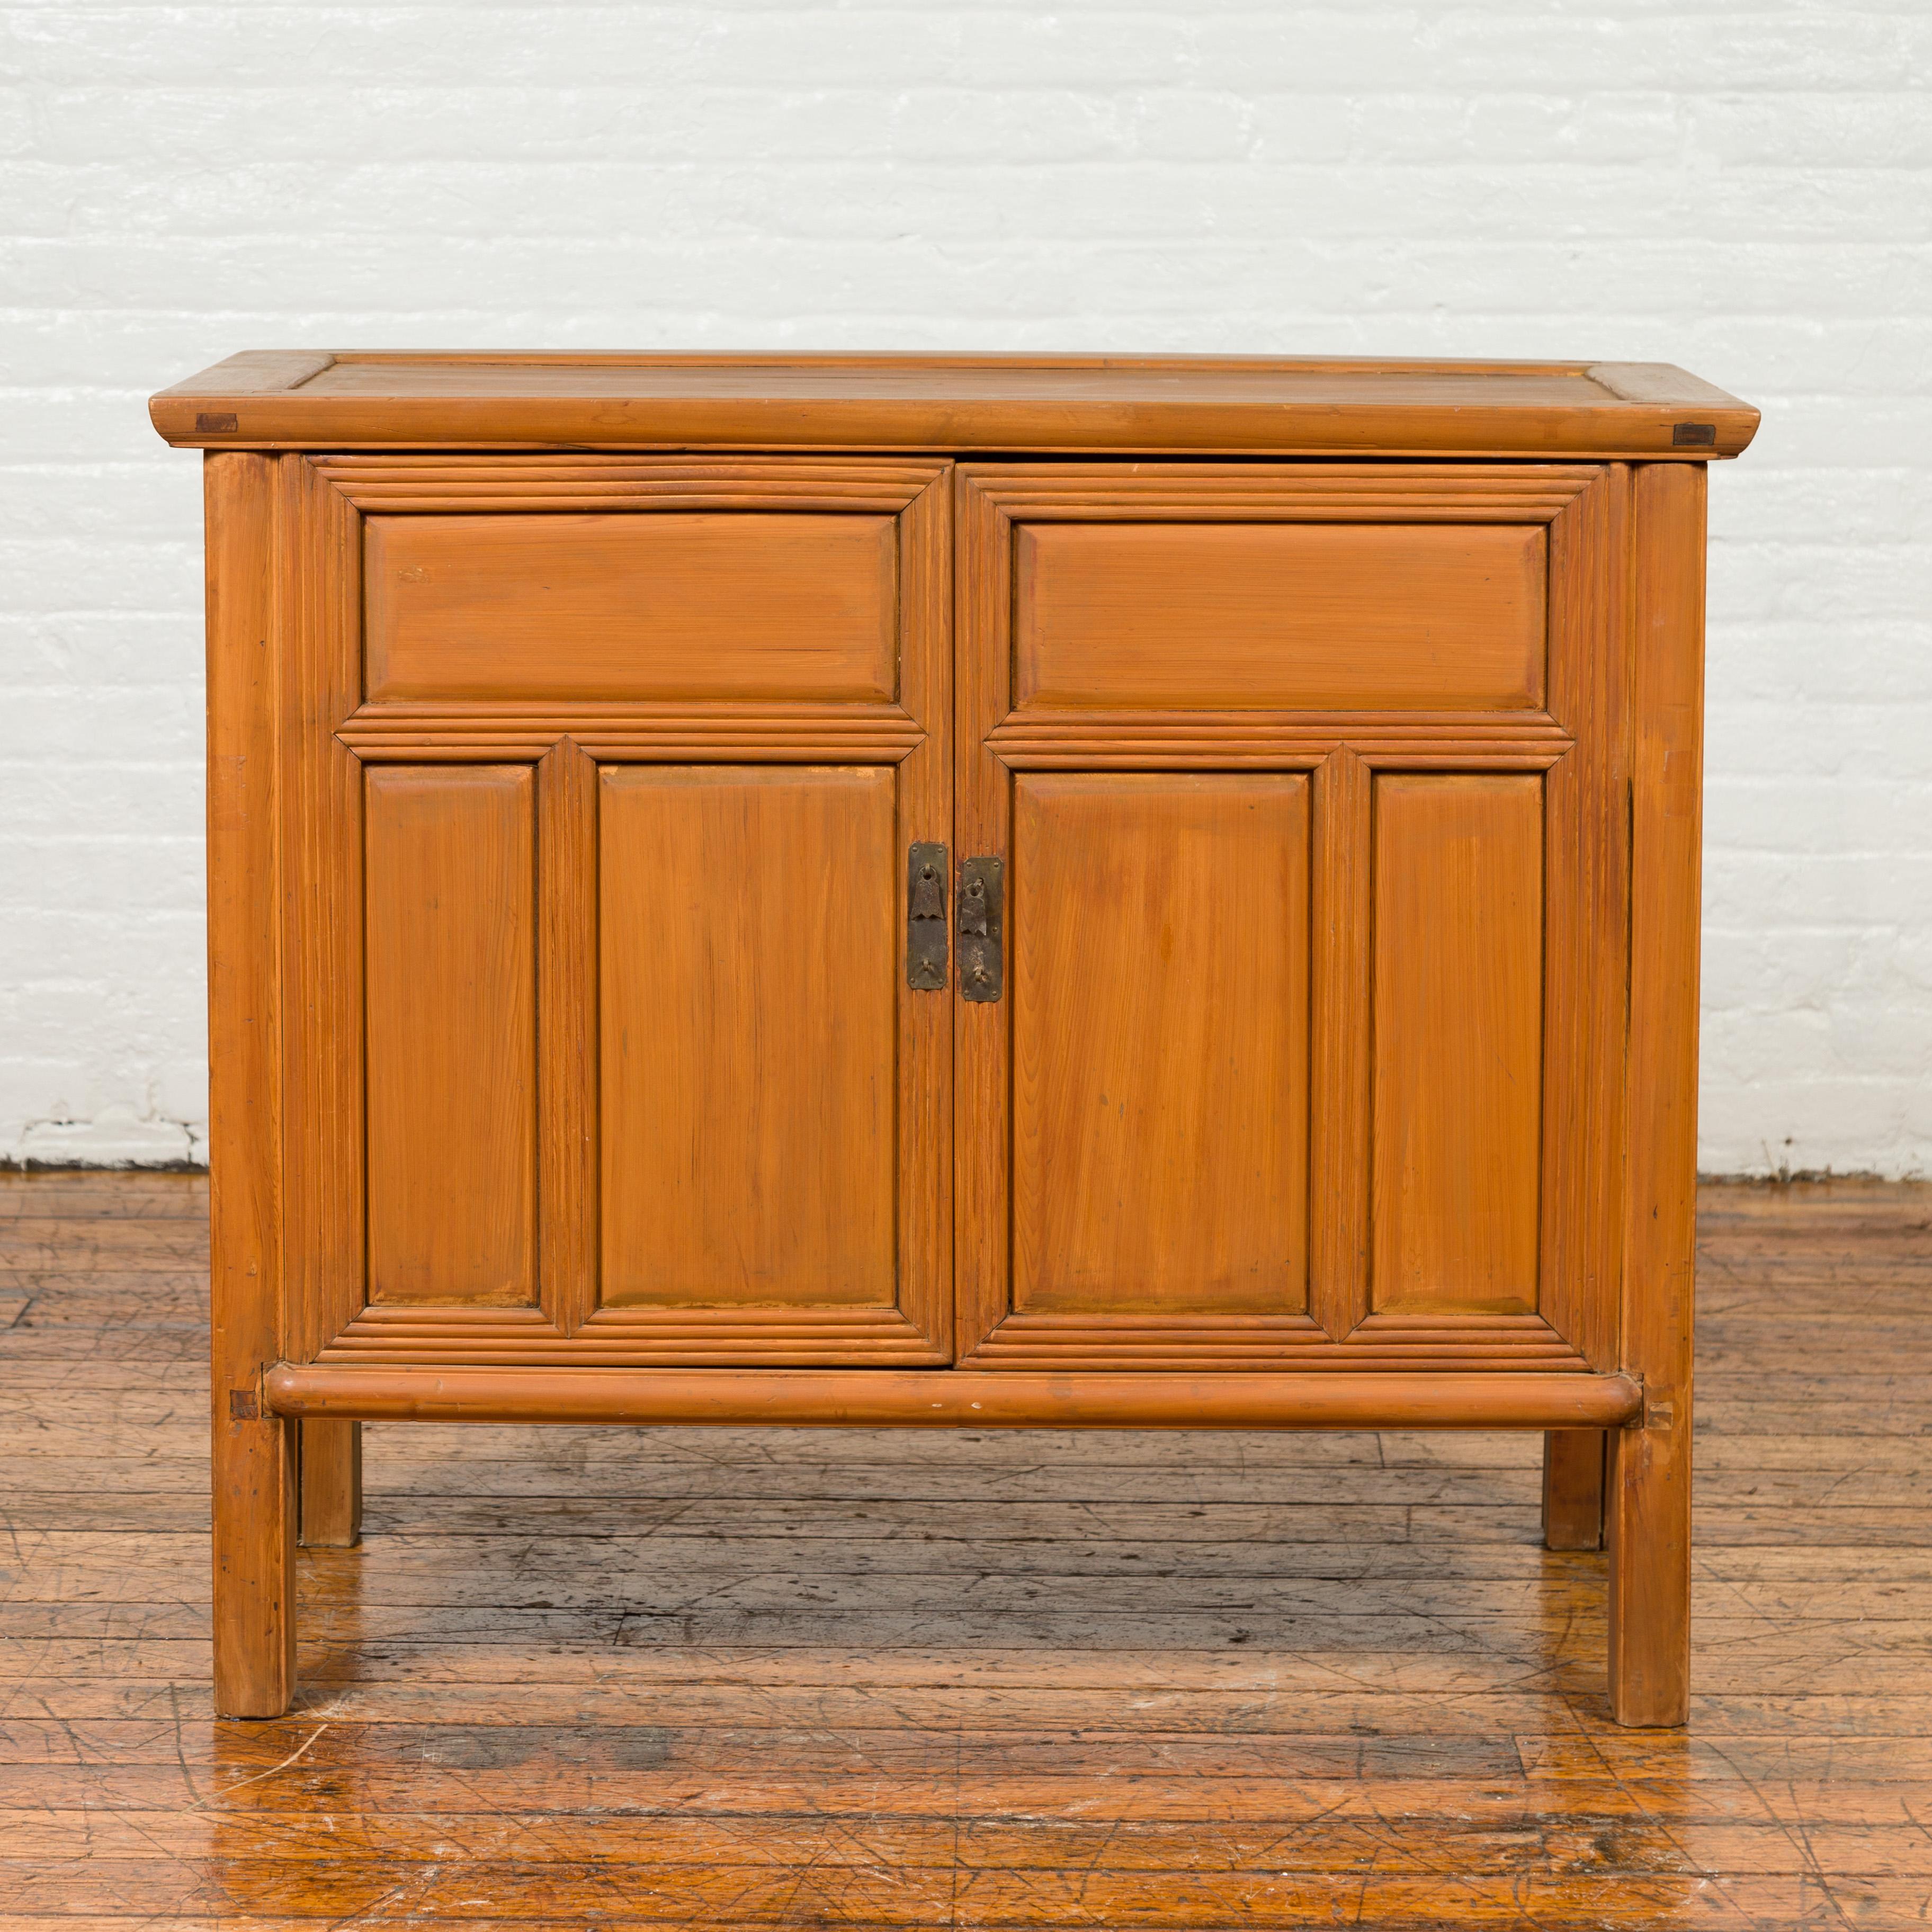 A vintage Chinese buffet from the mid-20th century, with paneled doors and hidden drawers. Discover the rustic charm of this mid-century Chinese buffet, an example of Asian craftsmanship boasting paneled doors and hidden drawers. Crafted during the